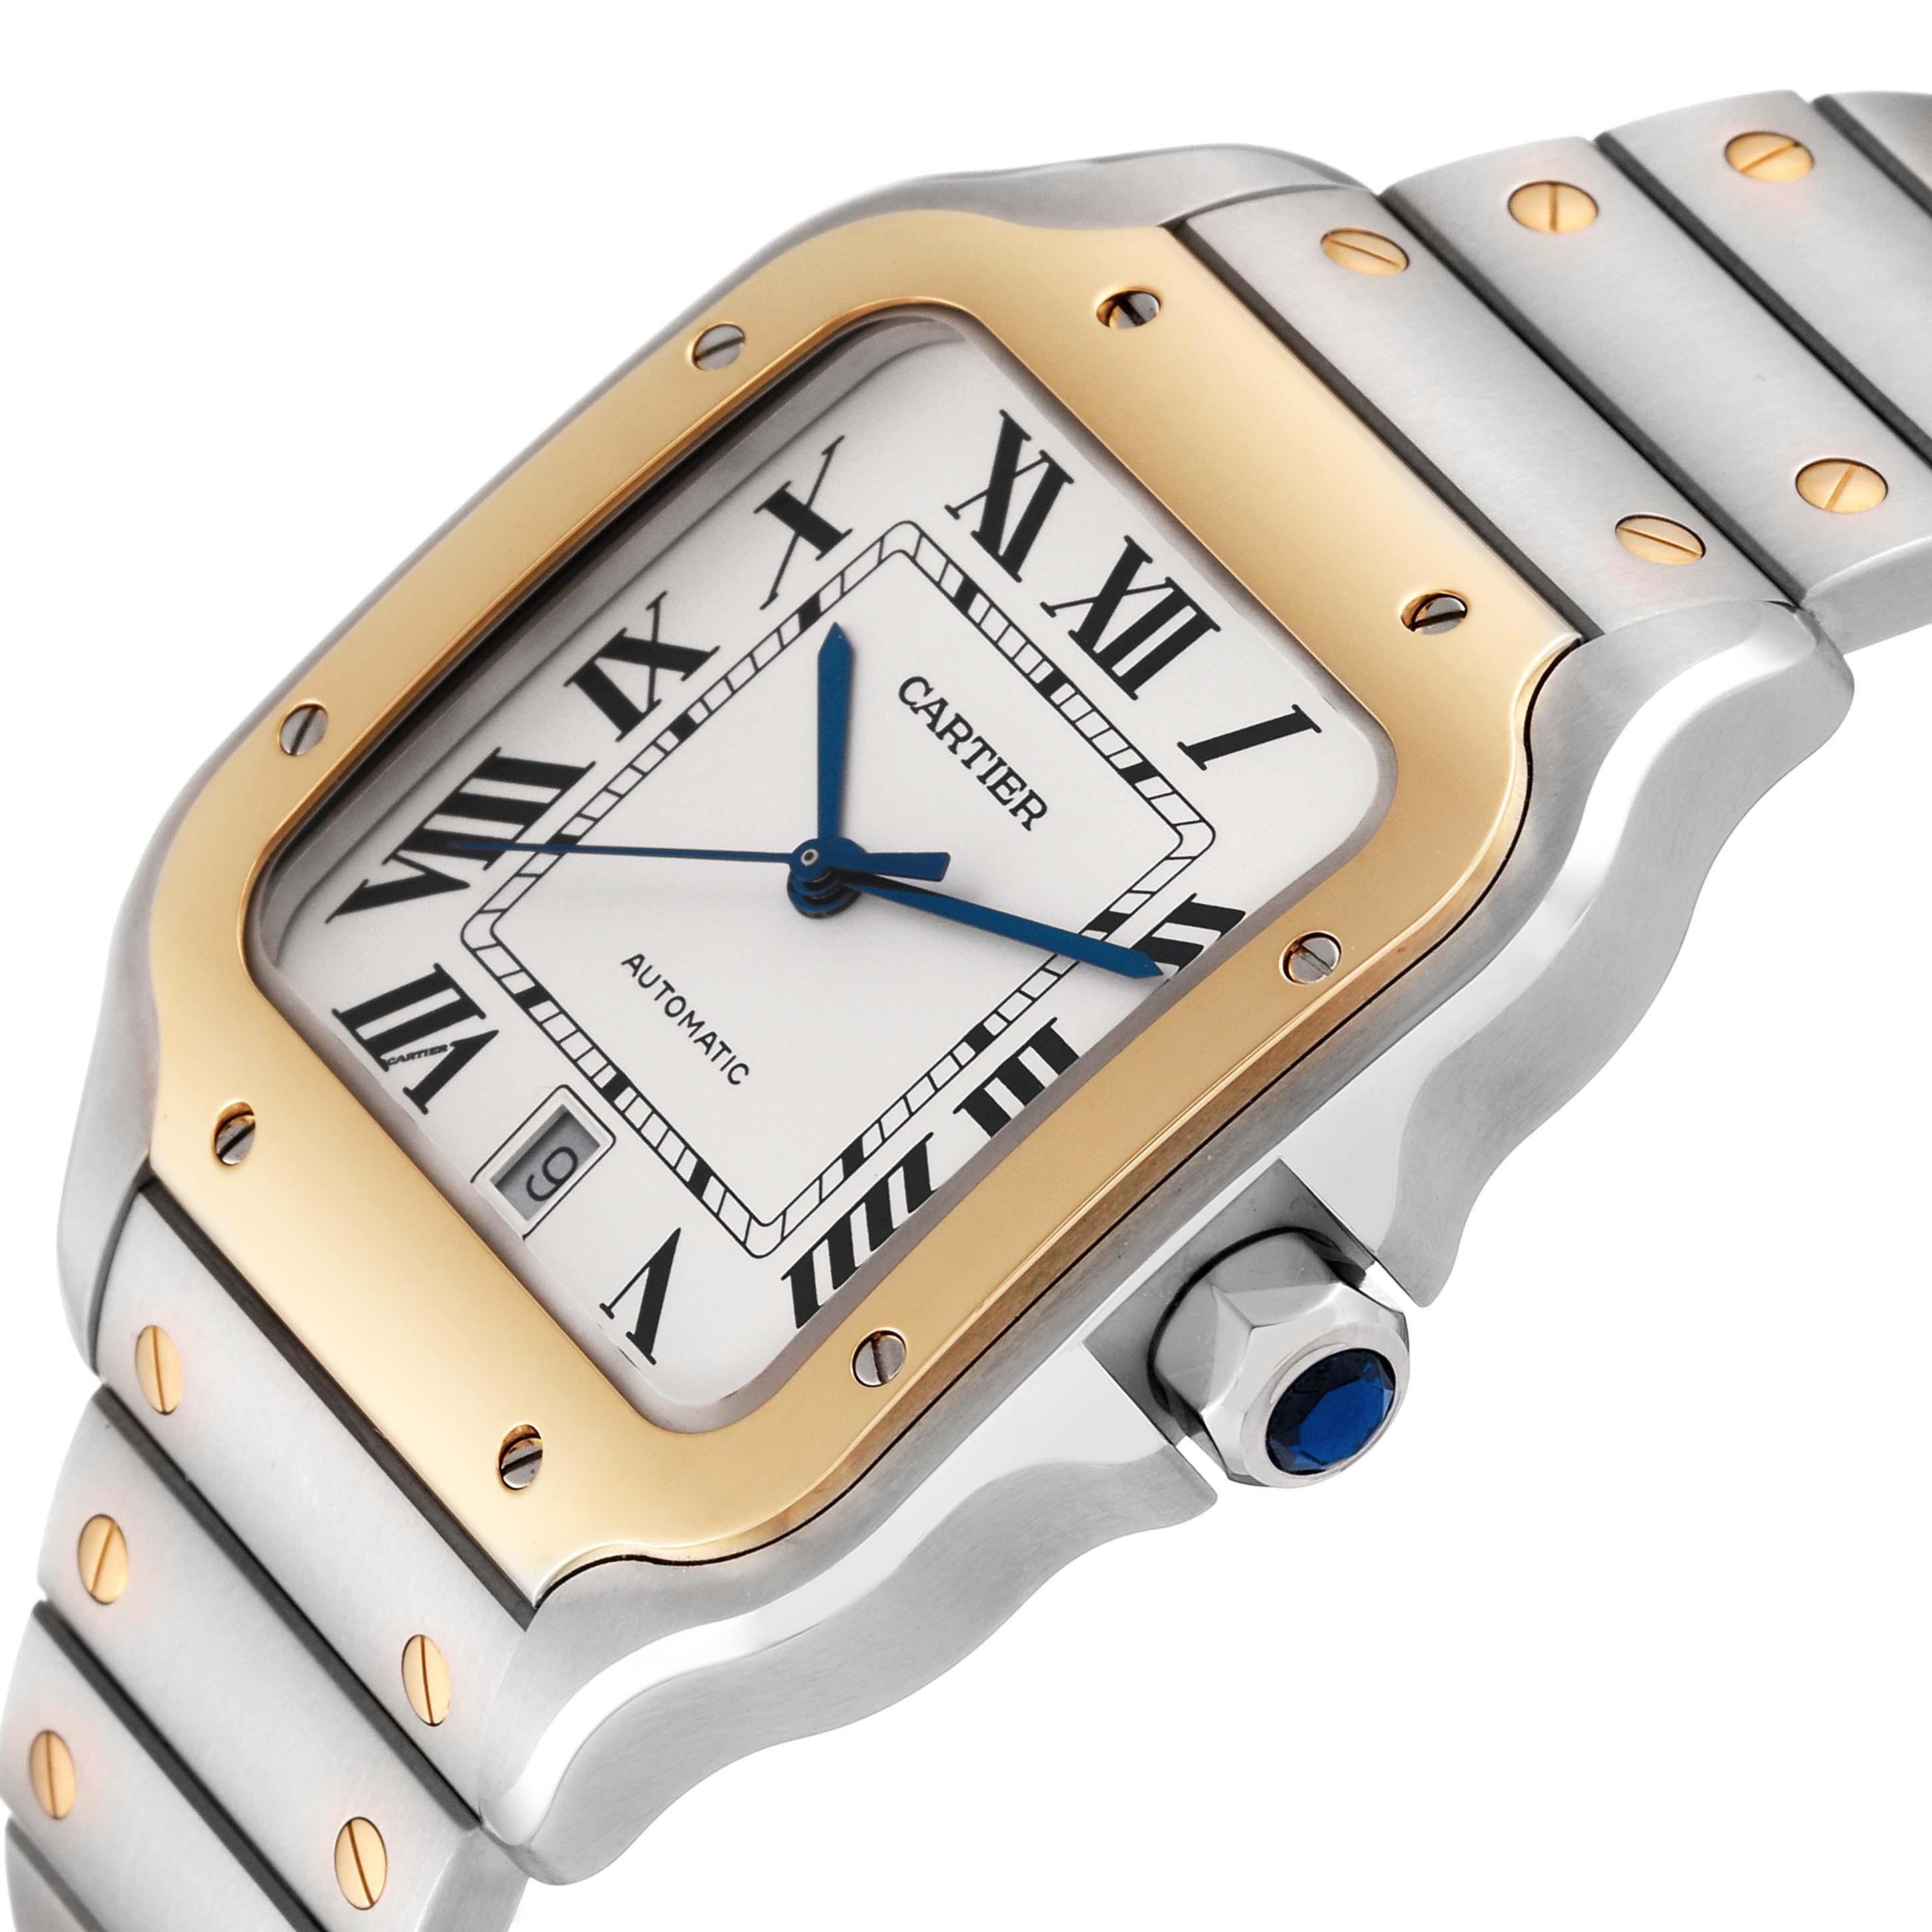 Cartier Santos Large Steel Yellow Gold Mens Watch W2SA0009 Unworn. Automatic self-winding movement. Stainless steel case 39.8 x 47.5mm. Steel octagonal crown set with blue faceted spinel. 18k yellow gold bezel punctuated with 8 signature screws.